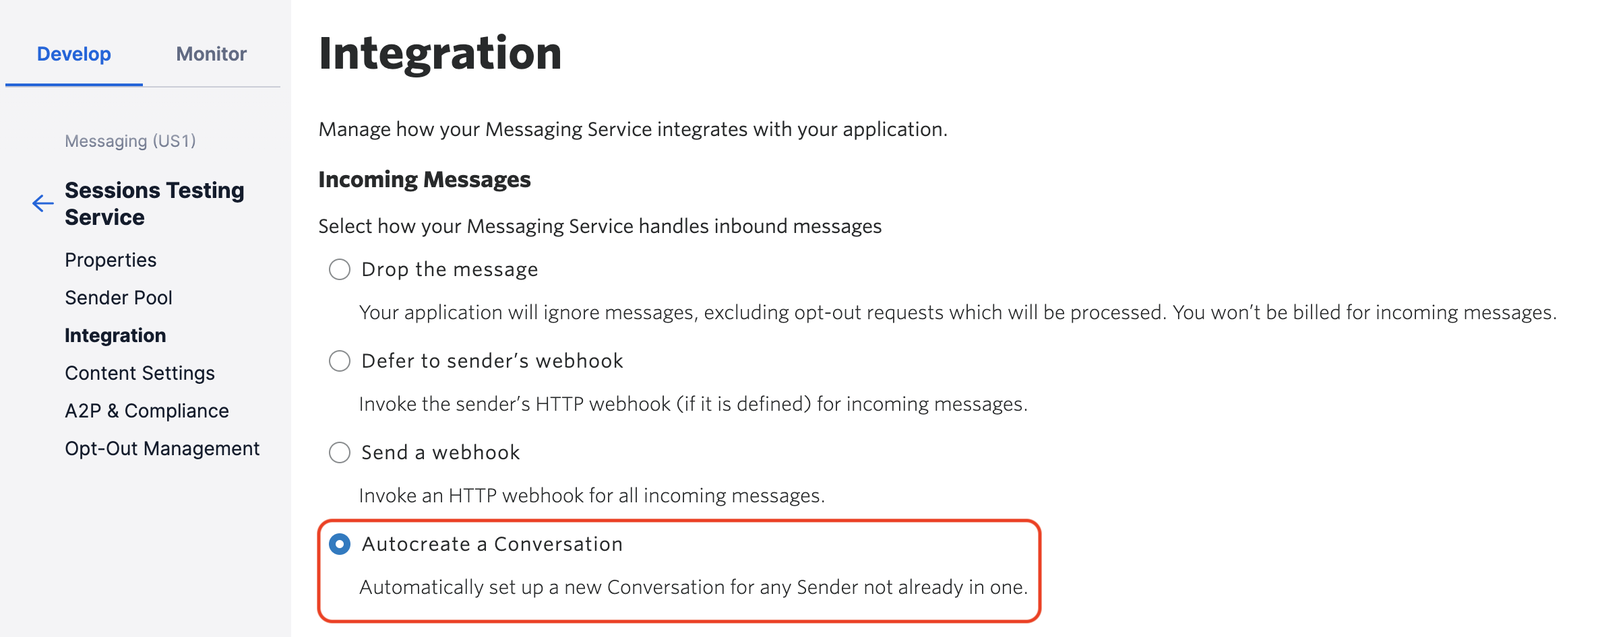 'Autocreate new Conversation' option selected under 'Integration' of Messaging Service.